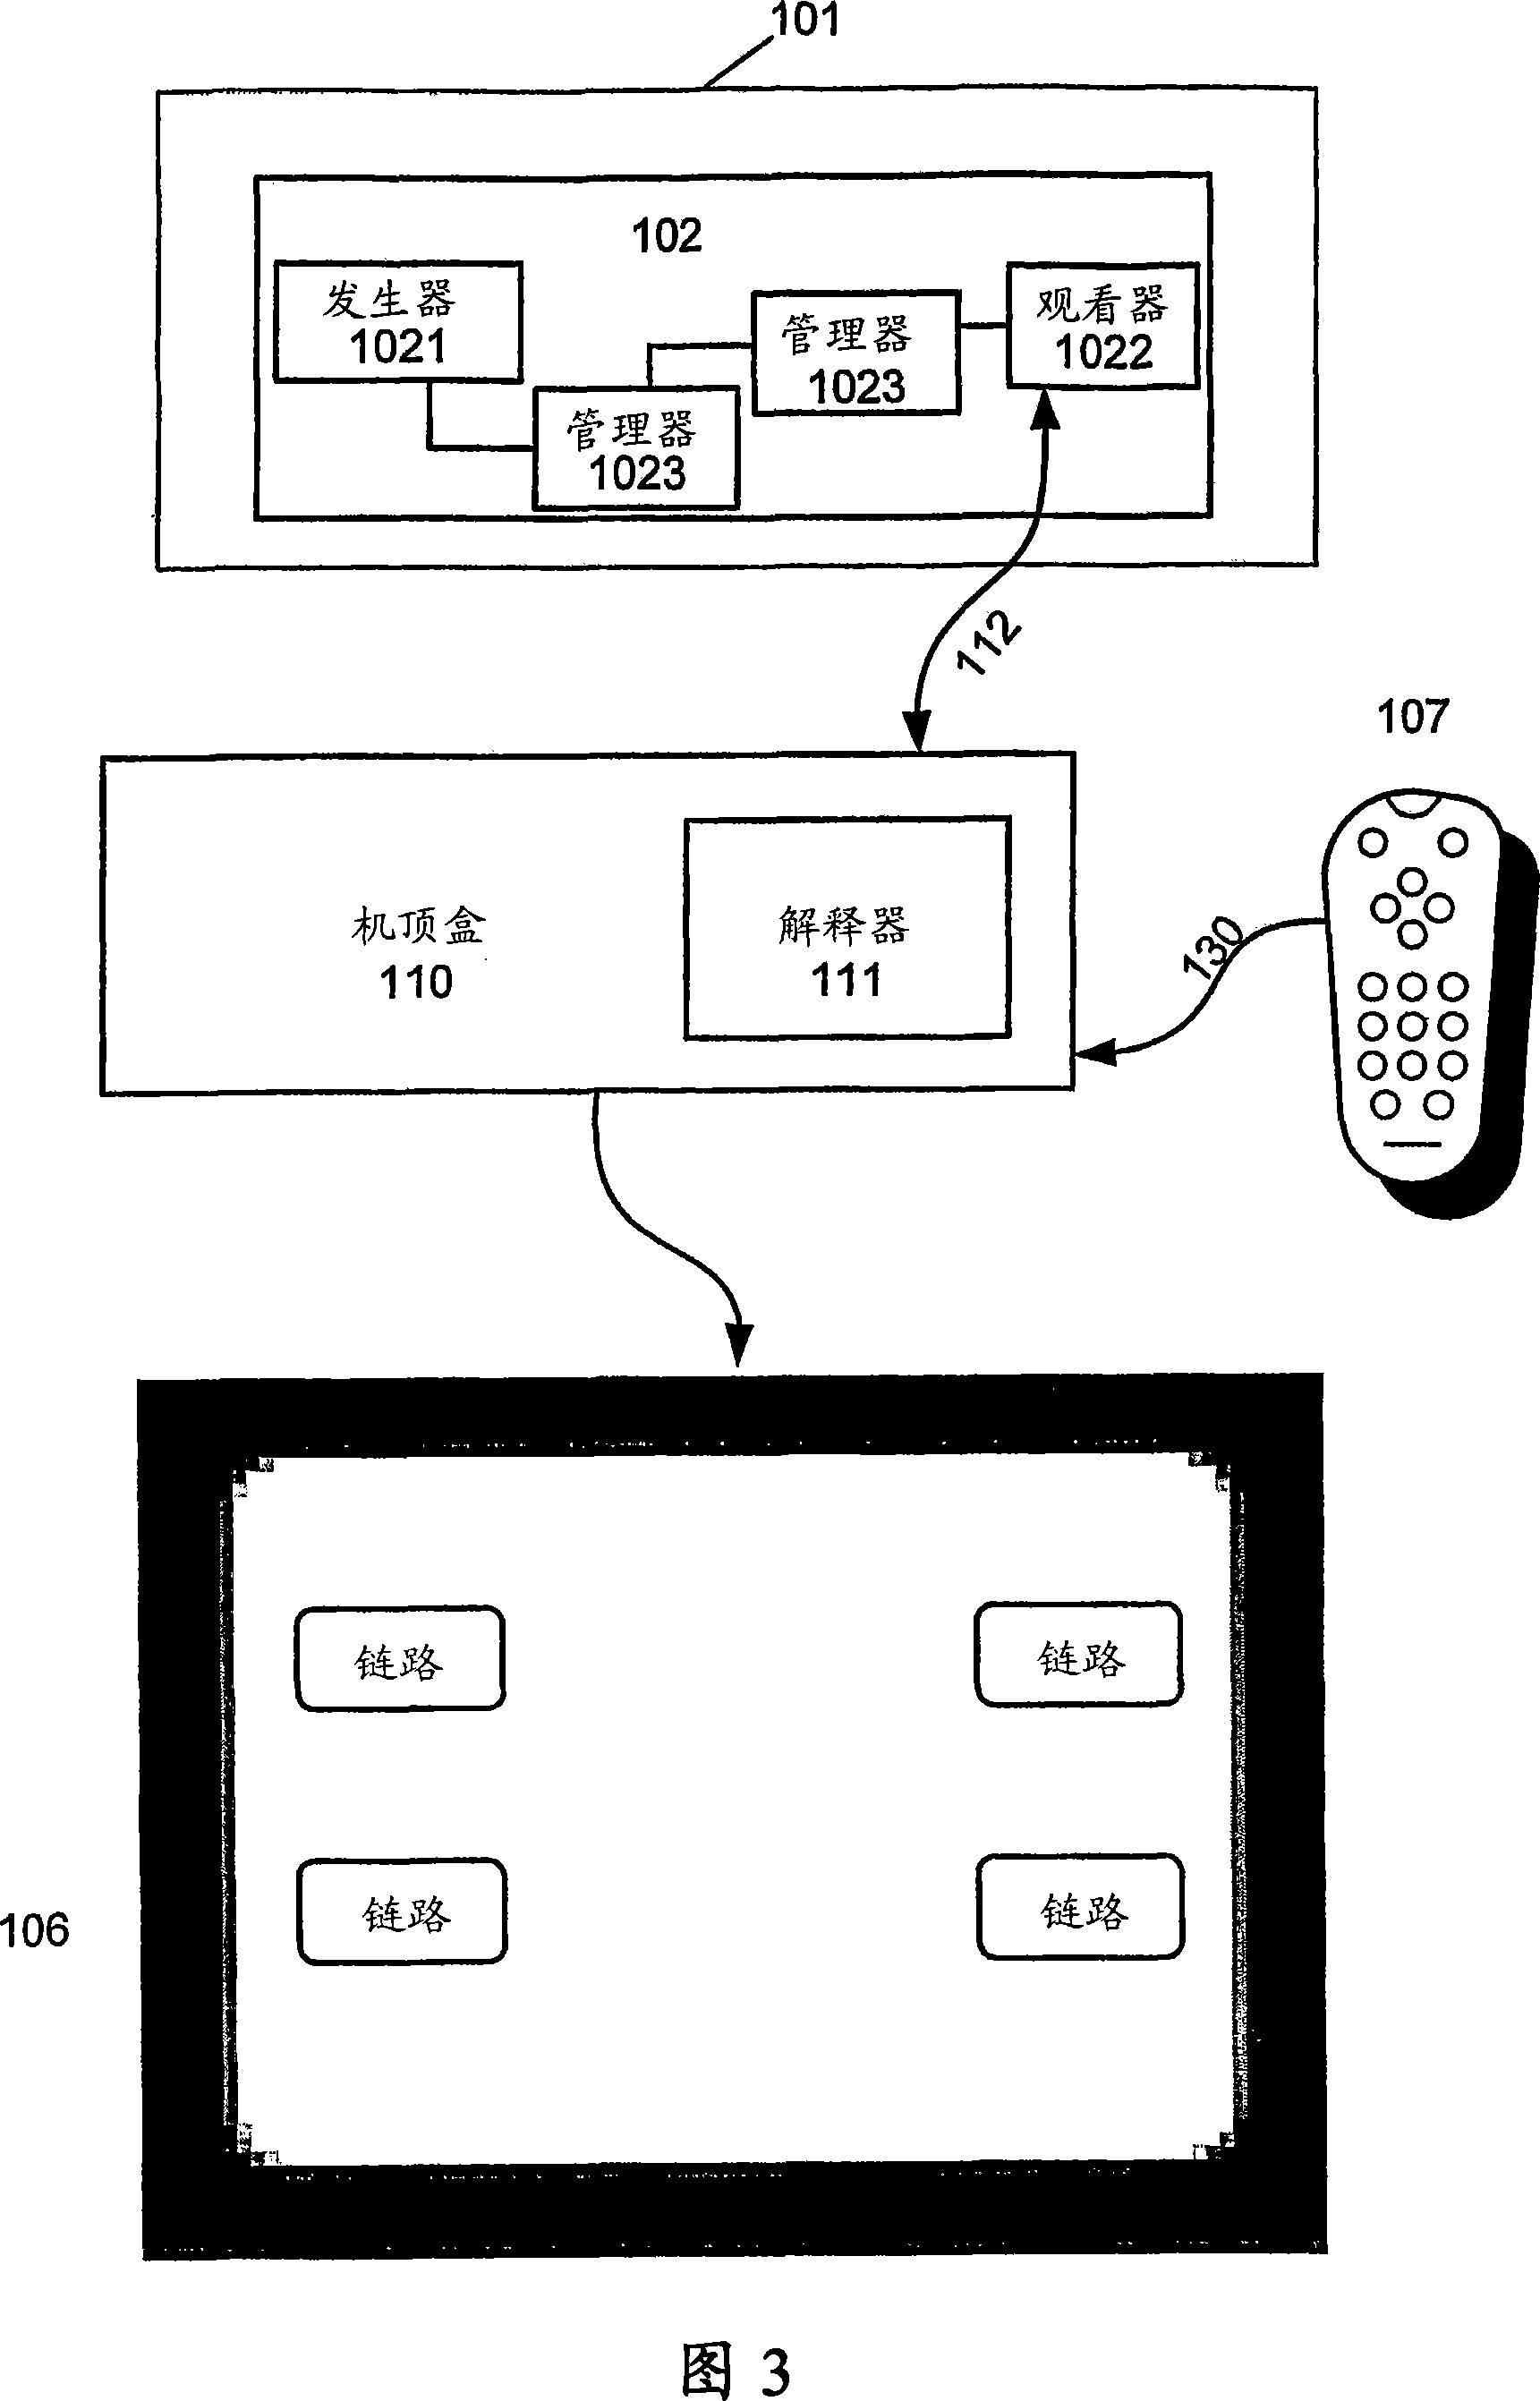 Television signal transmission of interlinked data and navigation information for use by a chaser program